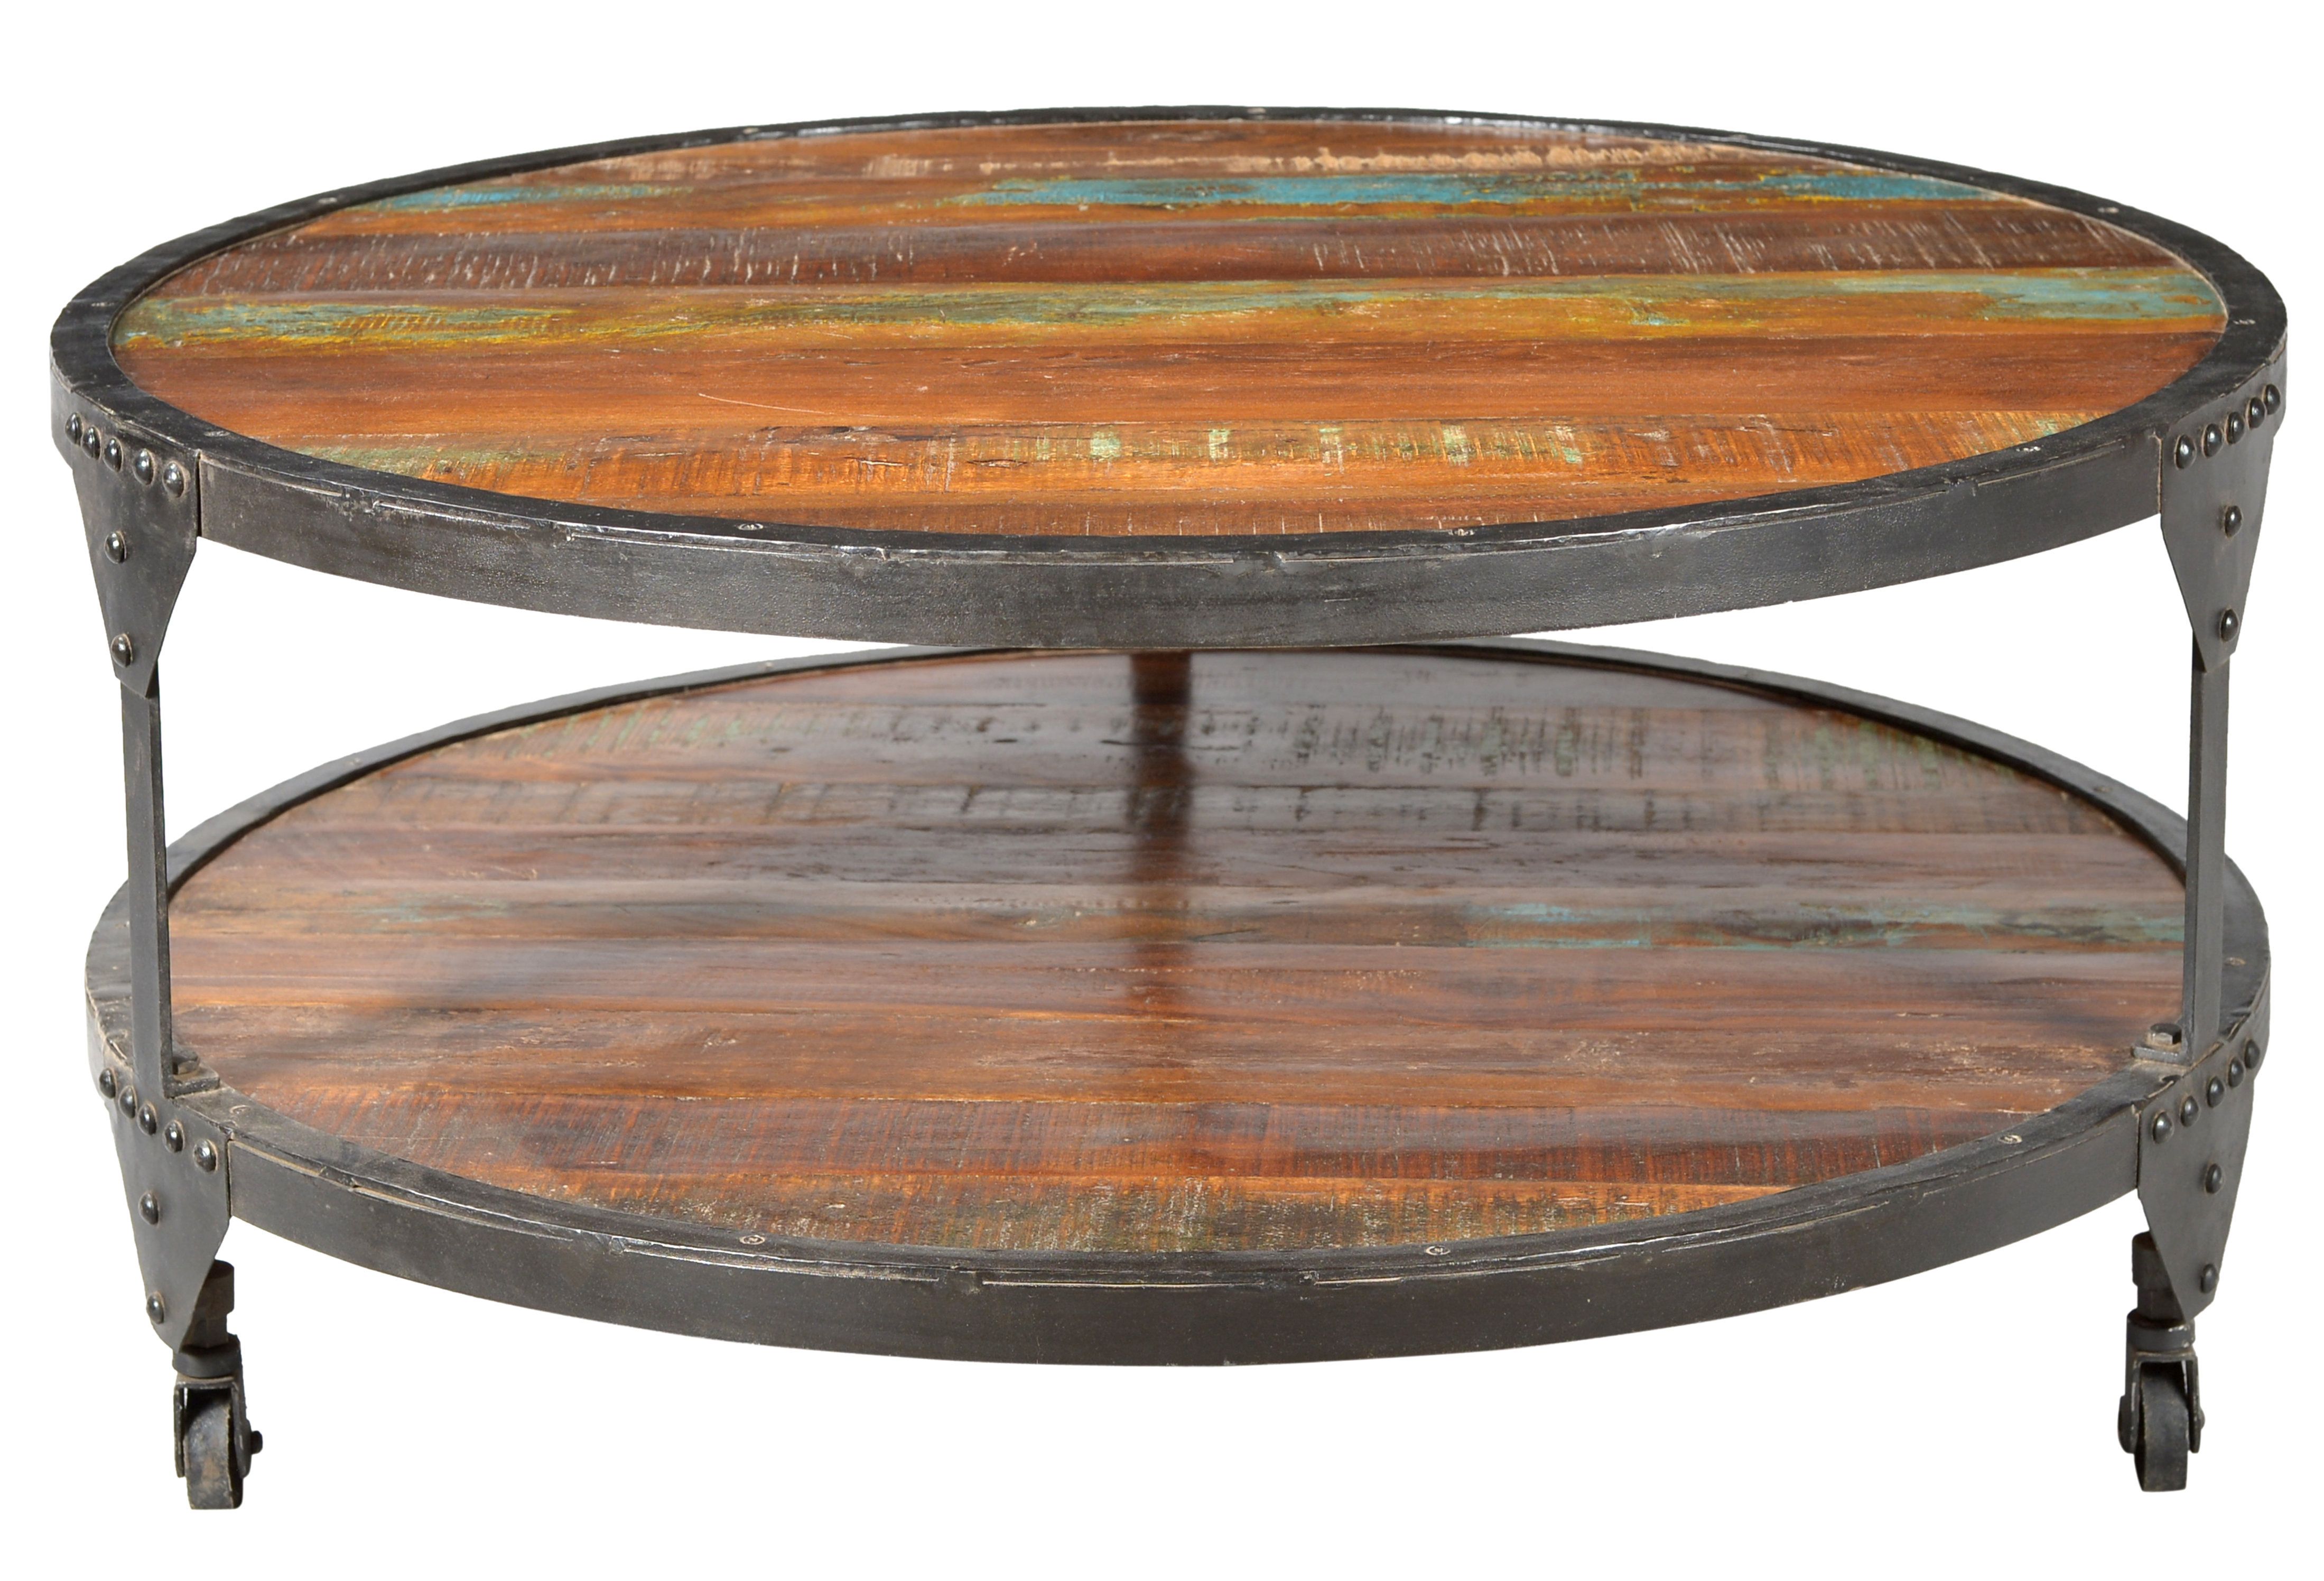 Trendy Honoria 3 Piece Dining Sets Throughout Loon Peak Honoria Coffee Table (View 19 of 20)